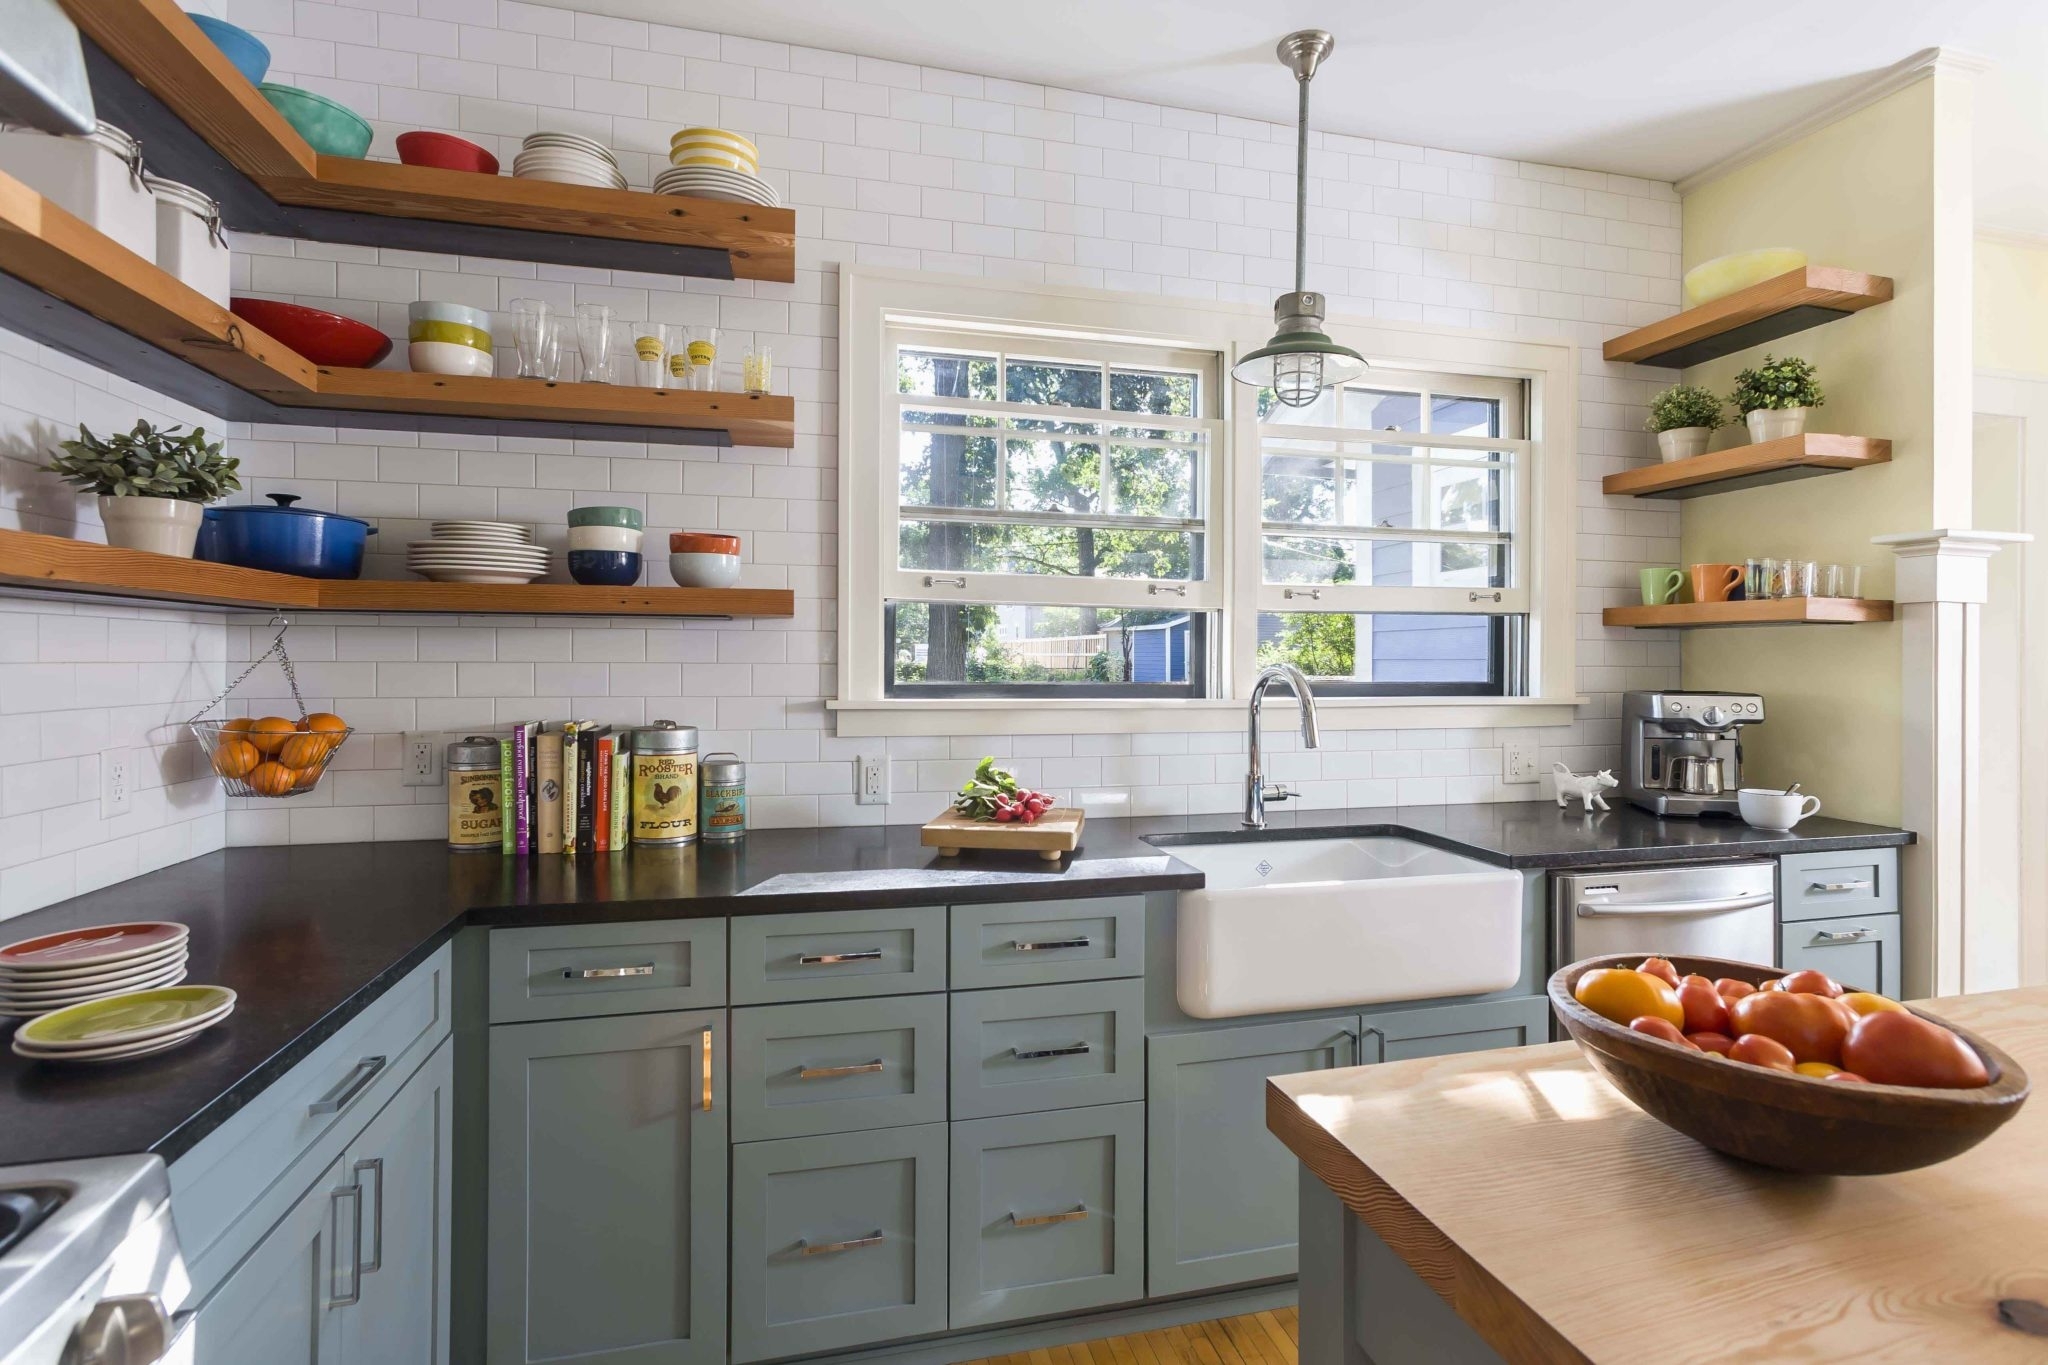 Open Shelving Cabinets: Which Is Better? Laurysen Kitchen Design ...